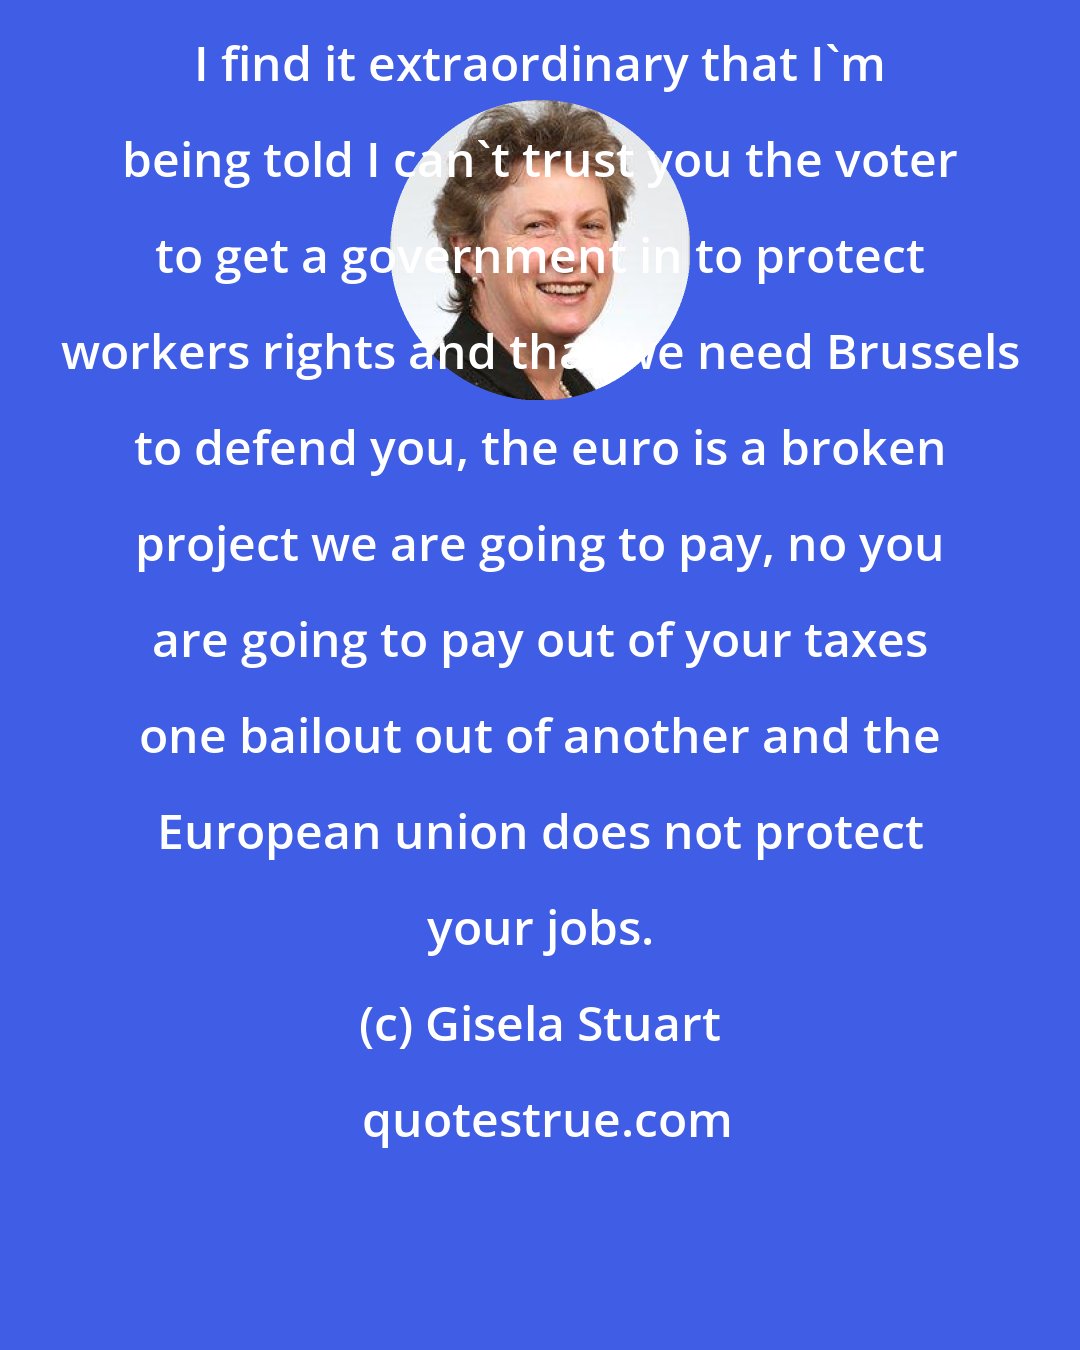 Gisela Stuart: I find it extraordinary that I'm being told I can't trust you the voter to get a government in to protect workers rights and that we need Brussels to defend you, the euro is a broken project we are going to pay, no you are going to pay out of your taxes one bailout out of another and the European union does not protect your jobs.